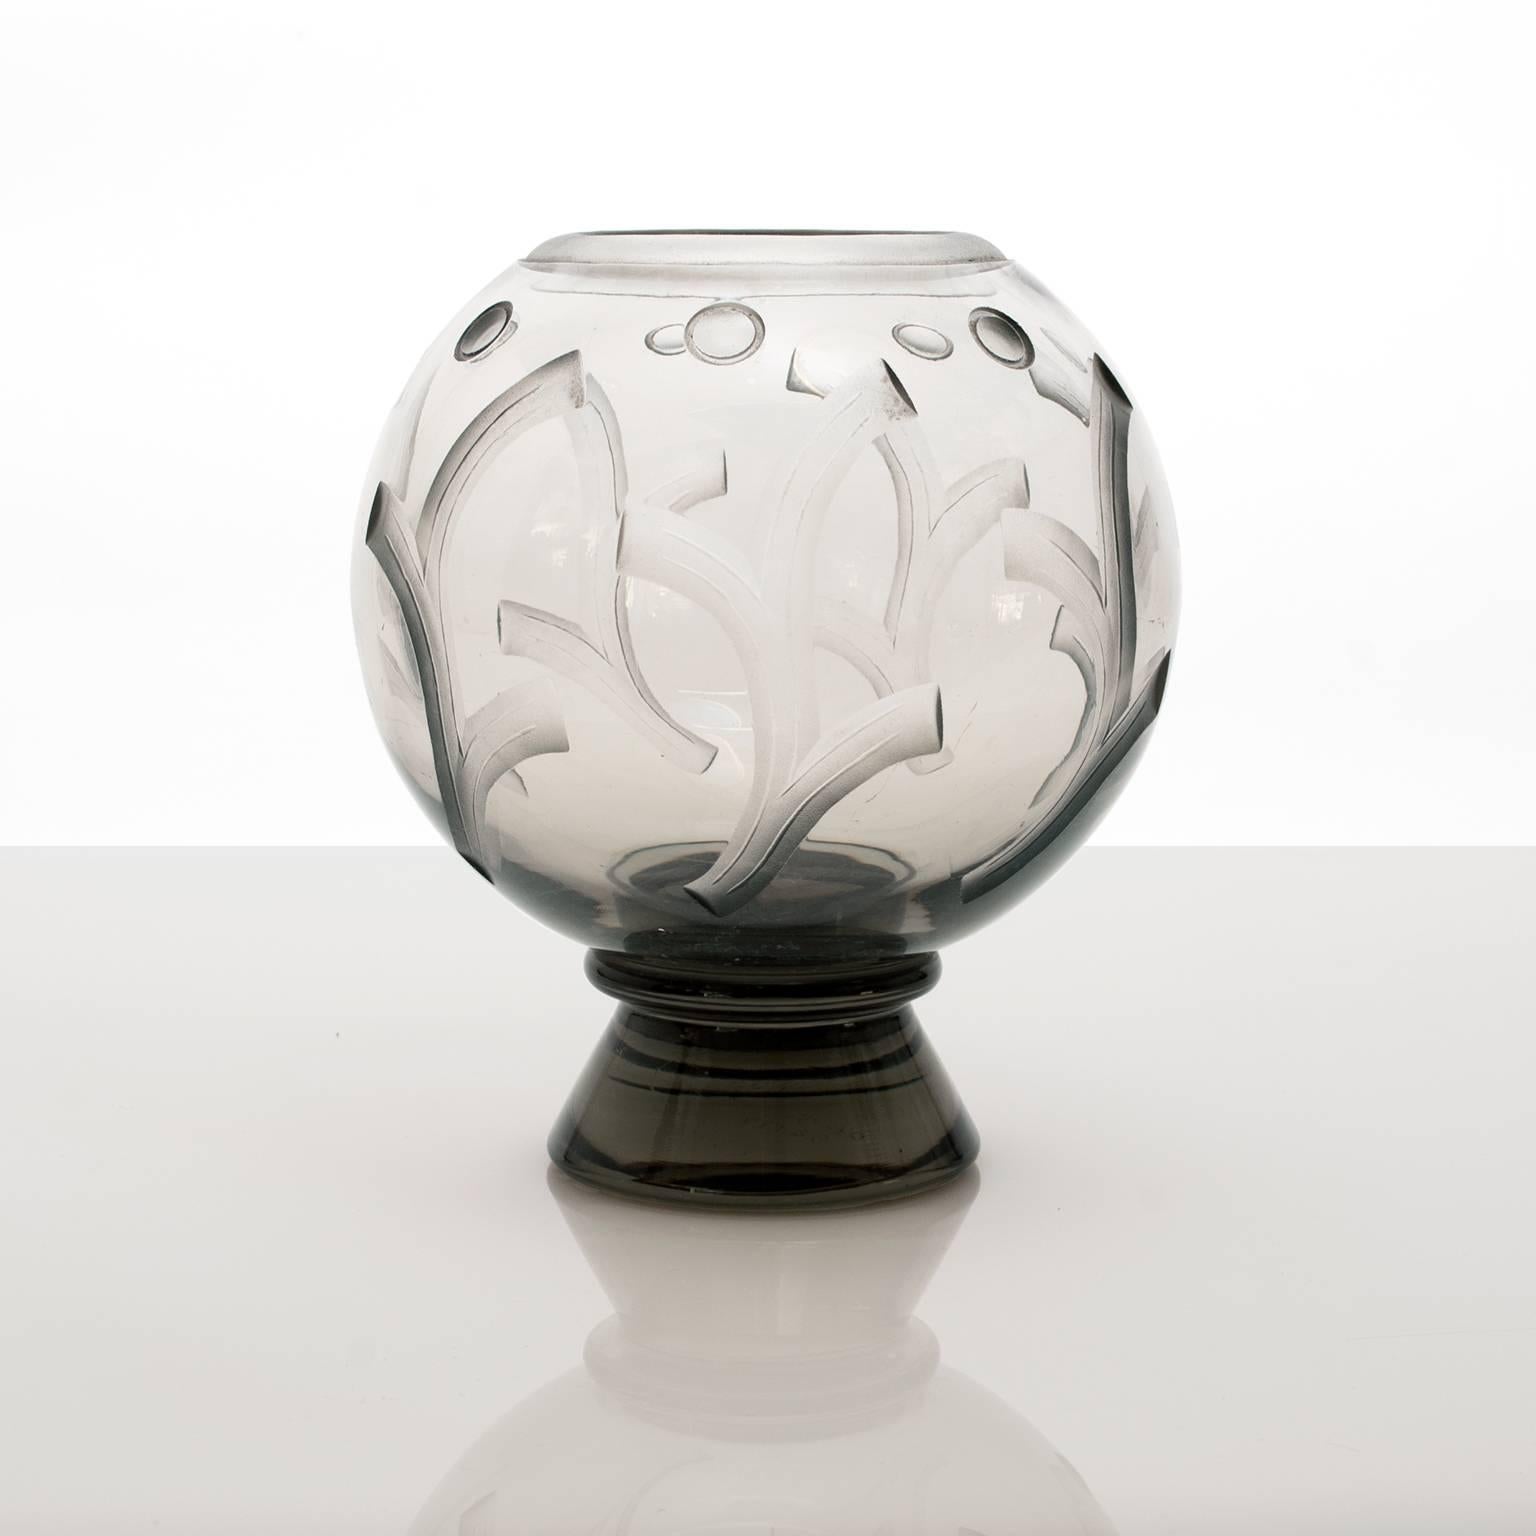 Scandinavian Modern Art Deco glass vase with etched design of stylized tree branches and circles. The vase is on a cone shaped foot in a transparent smokey ash colored glass. Designed by Simon Gate for Orrefors, dated 31. Minor wear.